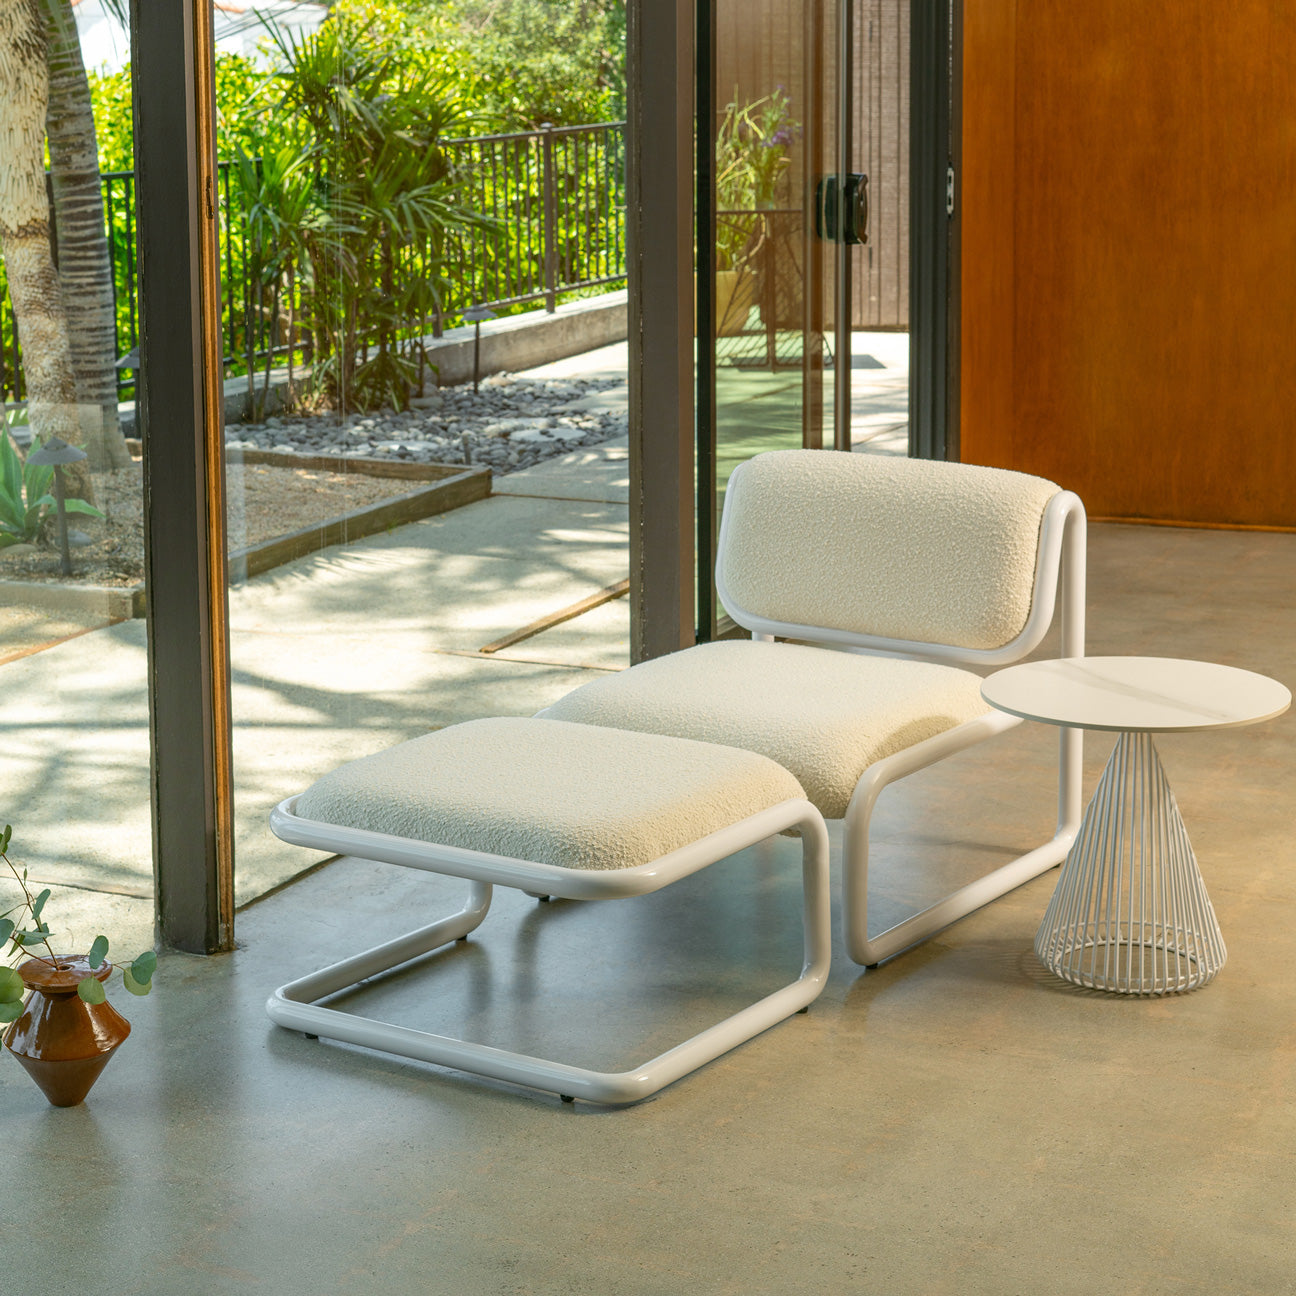 Tube Lounge Chair and Ottoman shown in White with Cream Boucle Fabric